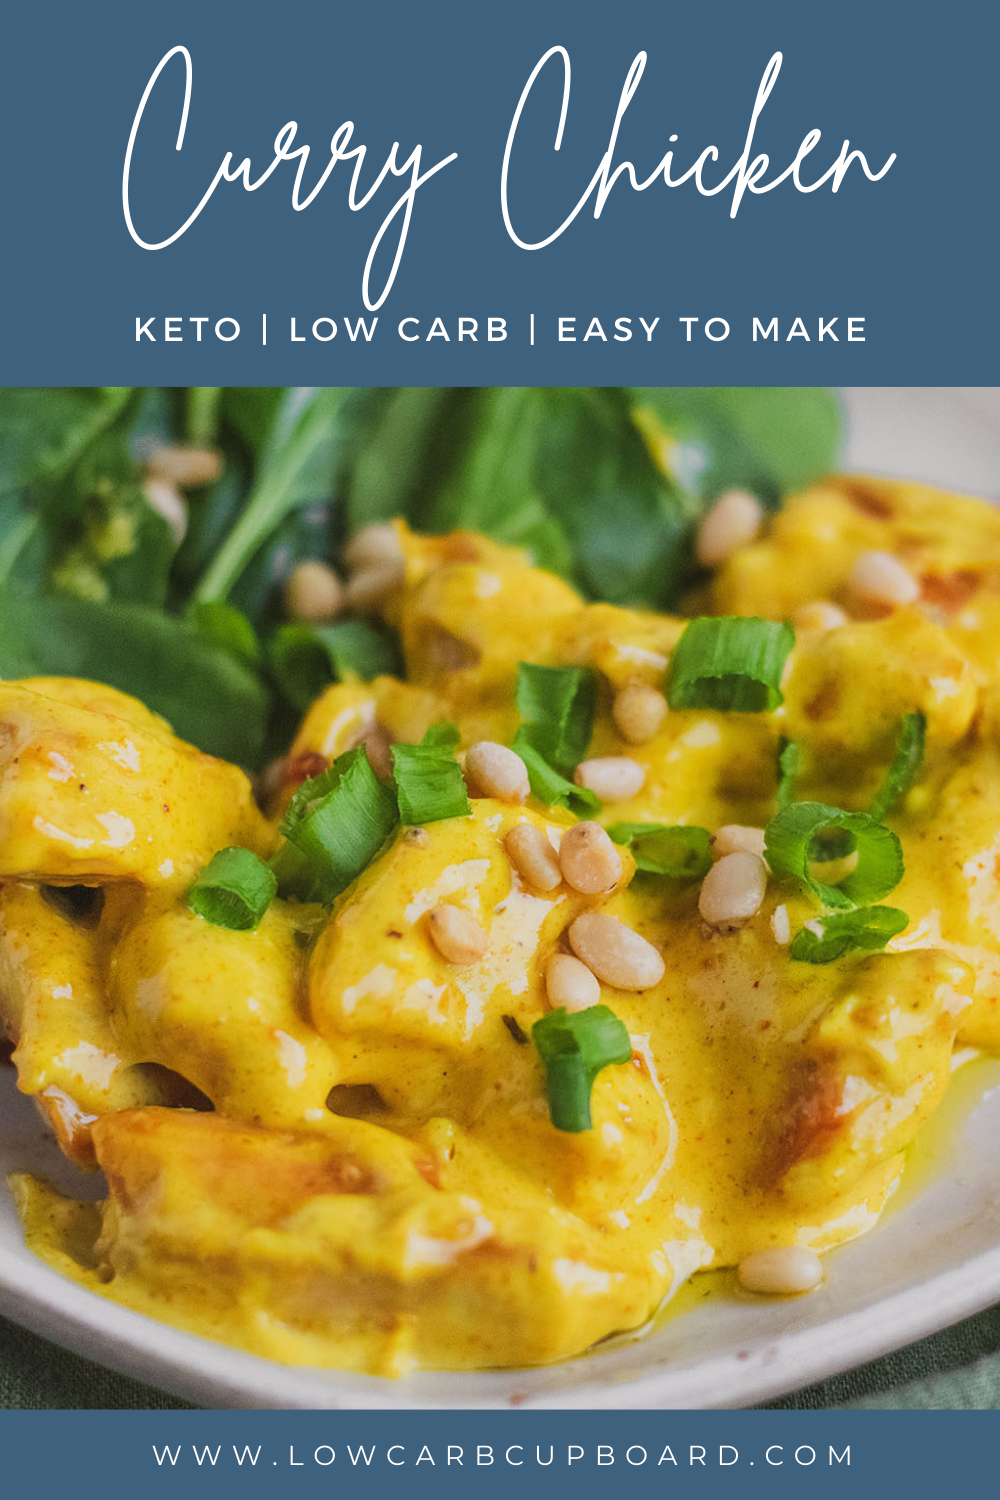 Curry Chicken - Easy to make keto and low carb recipe